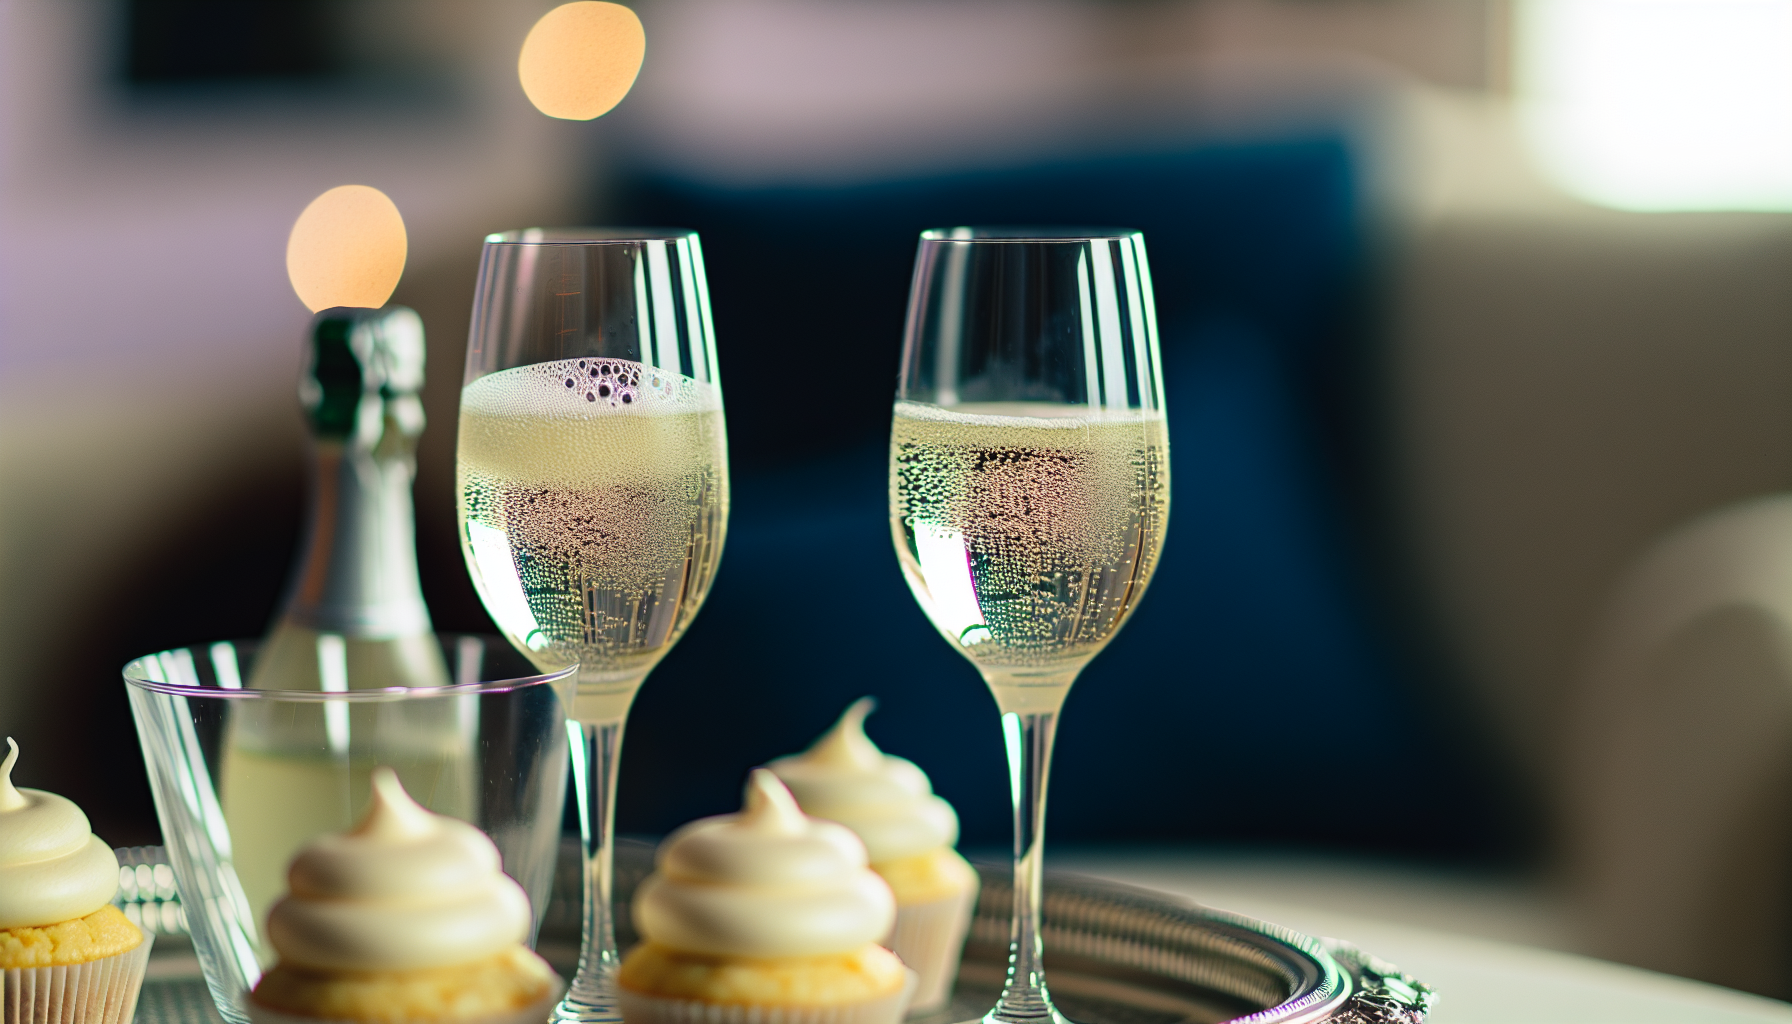 Chilled glasses of Cupcake Prosecco served with elegant wine glasses